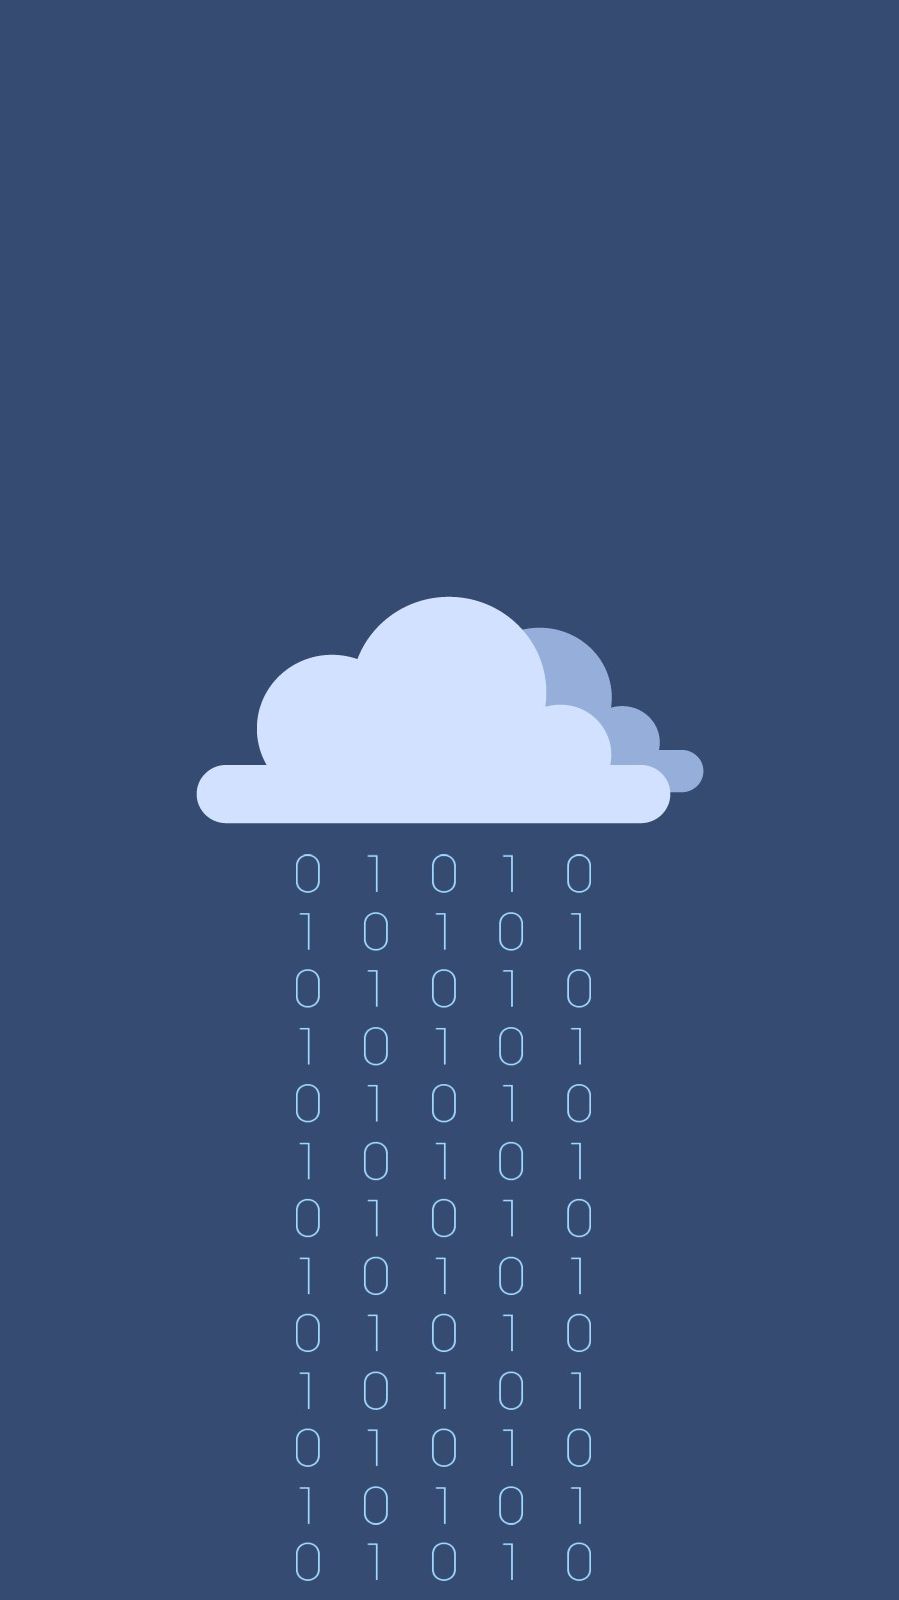 cloud storage Wallpaper. Cloud storage, Android wallpaper, Clouds